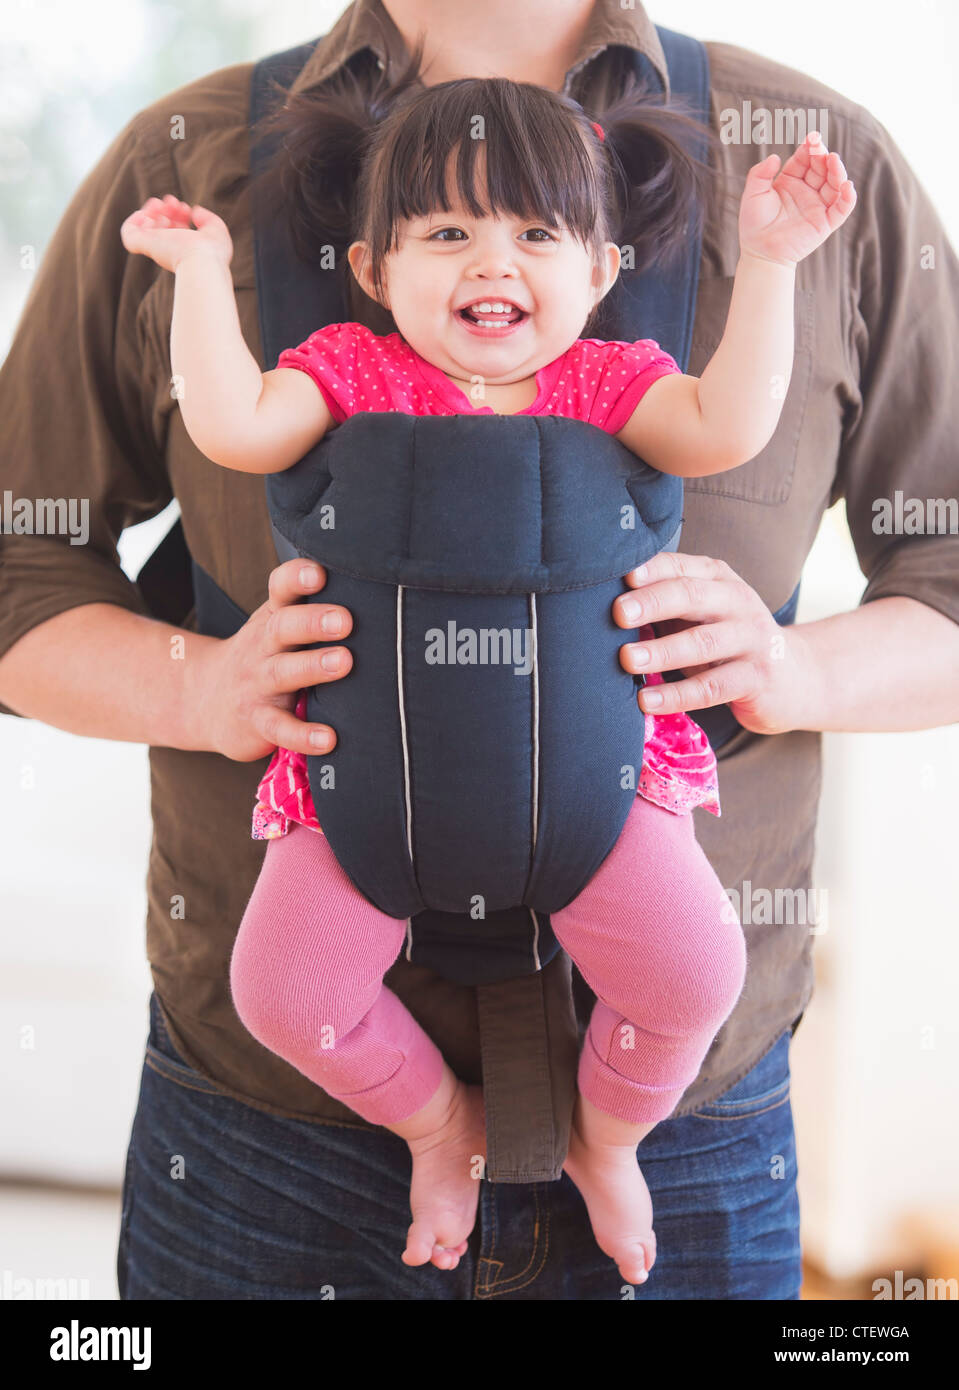 USA, New Jersey, Jersey City, Baby girl (12-17 months) in baby carrier held by her father Stock Photo